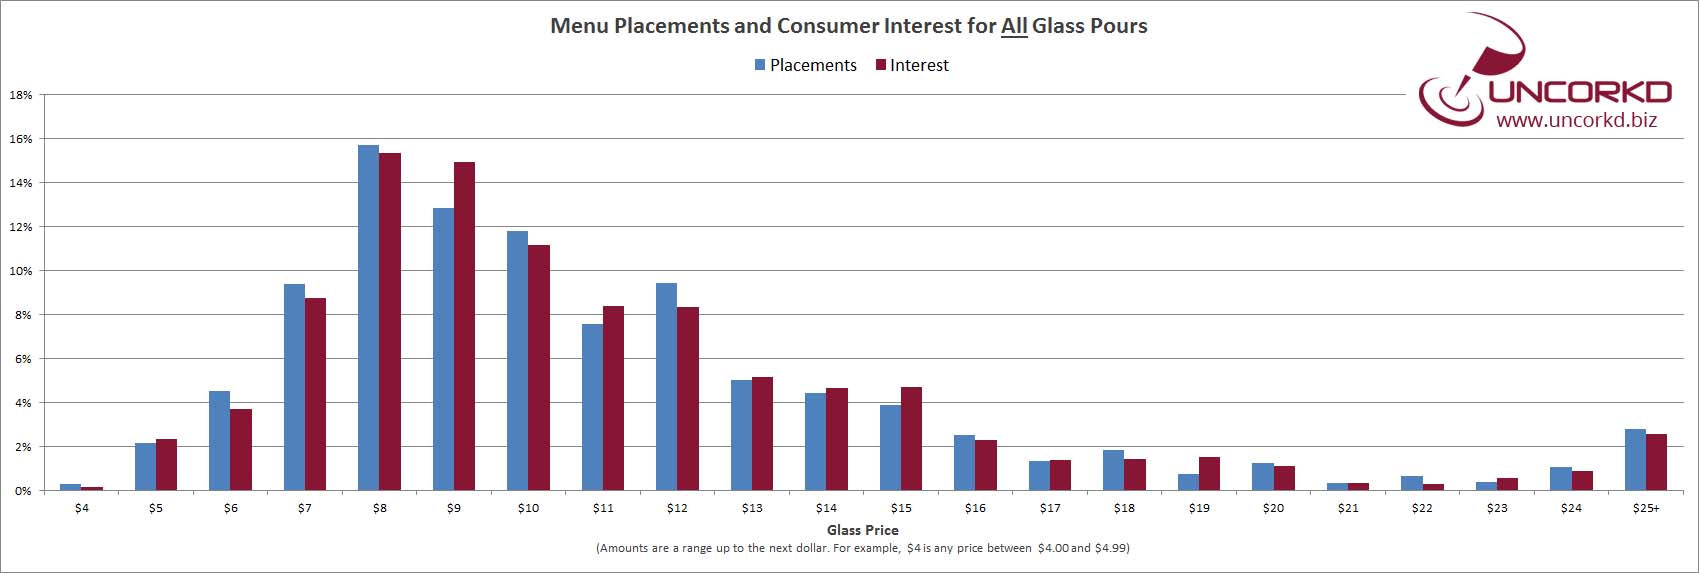 Wine Glass Pricing, Placements and Interest for All Wine